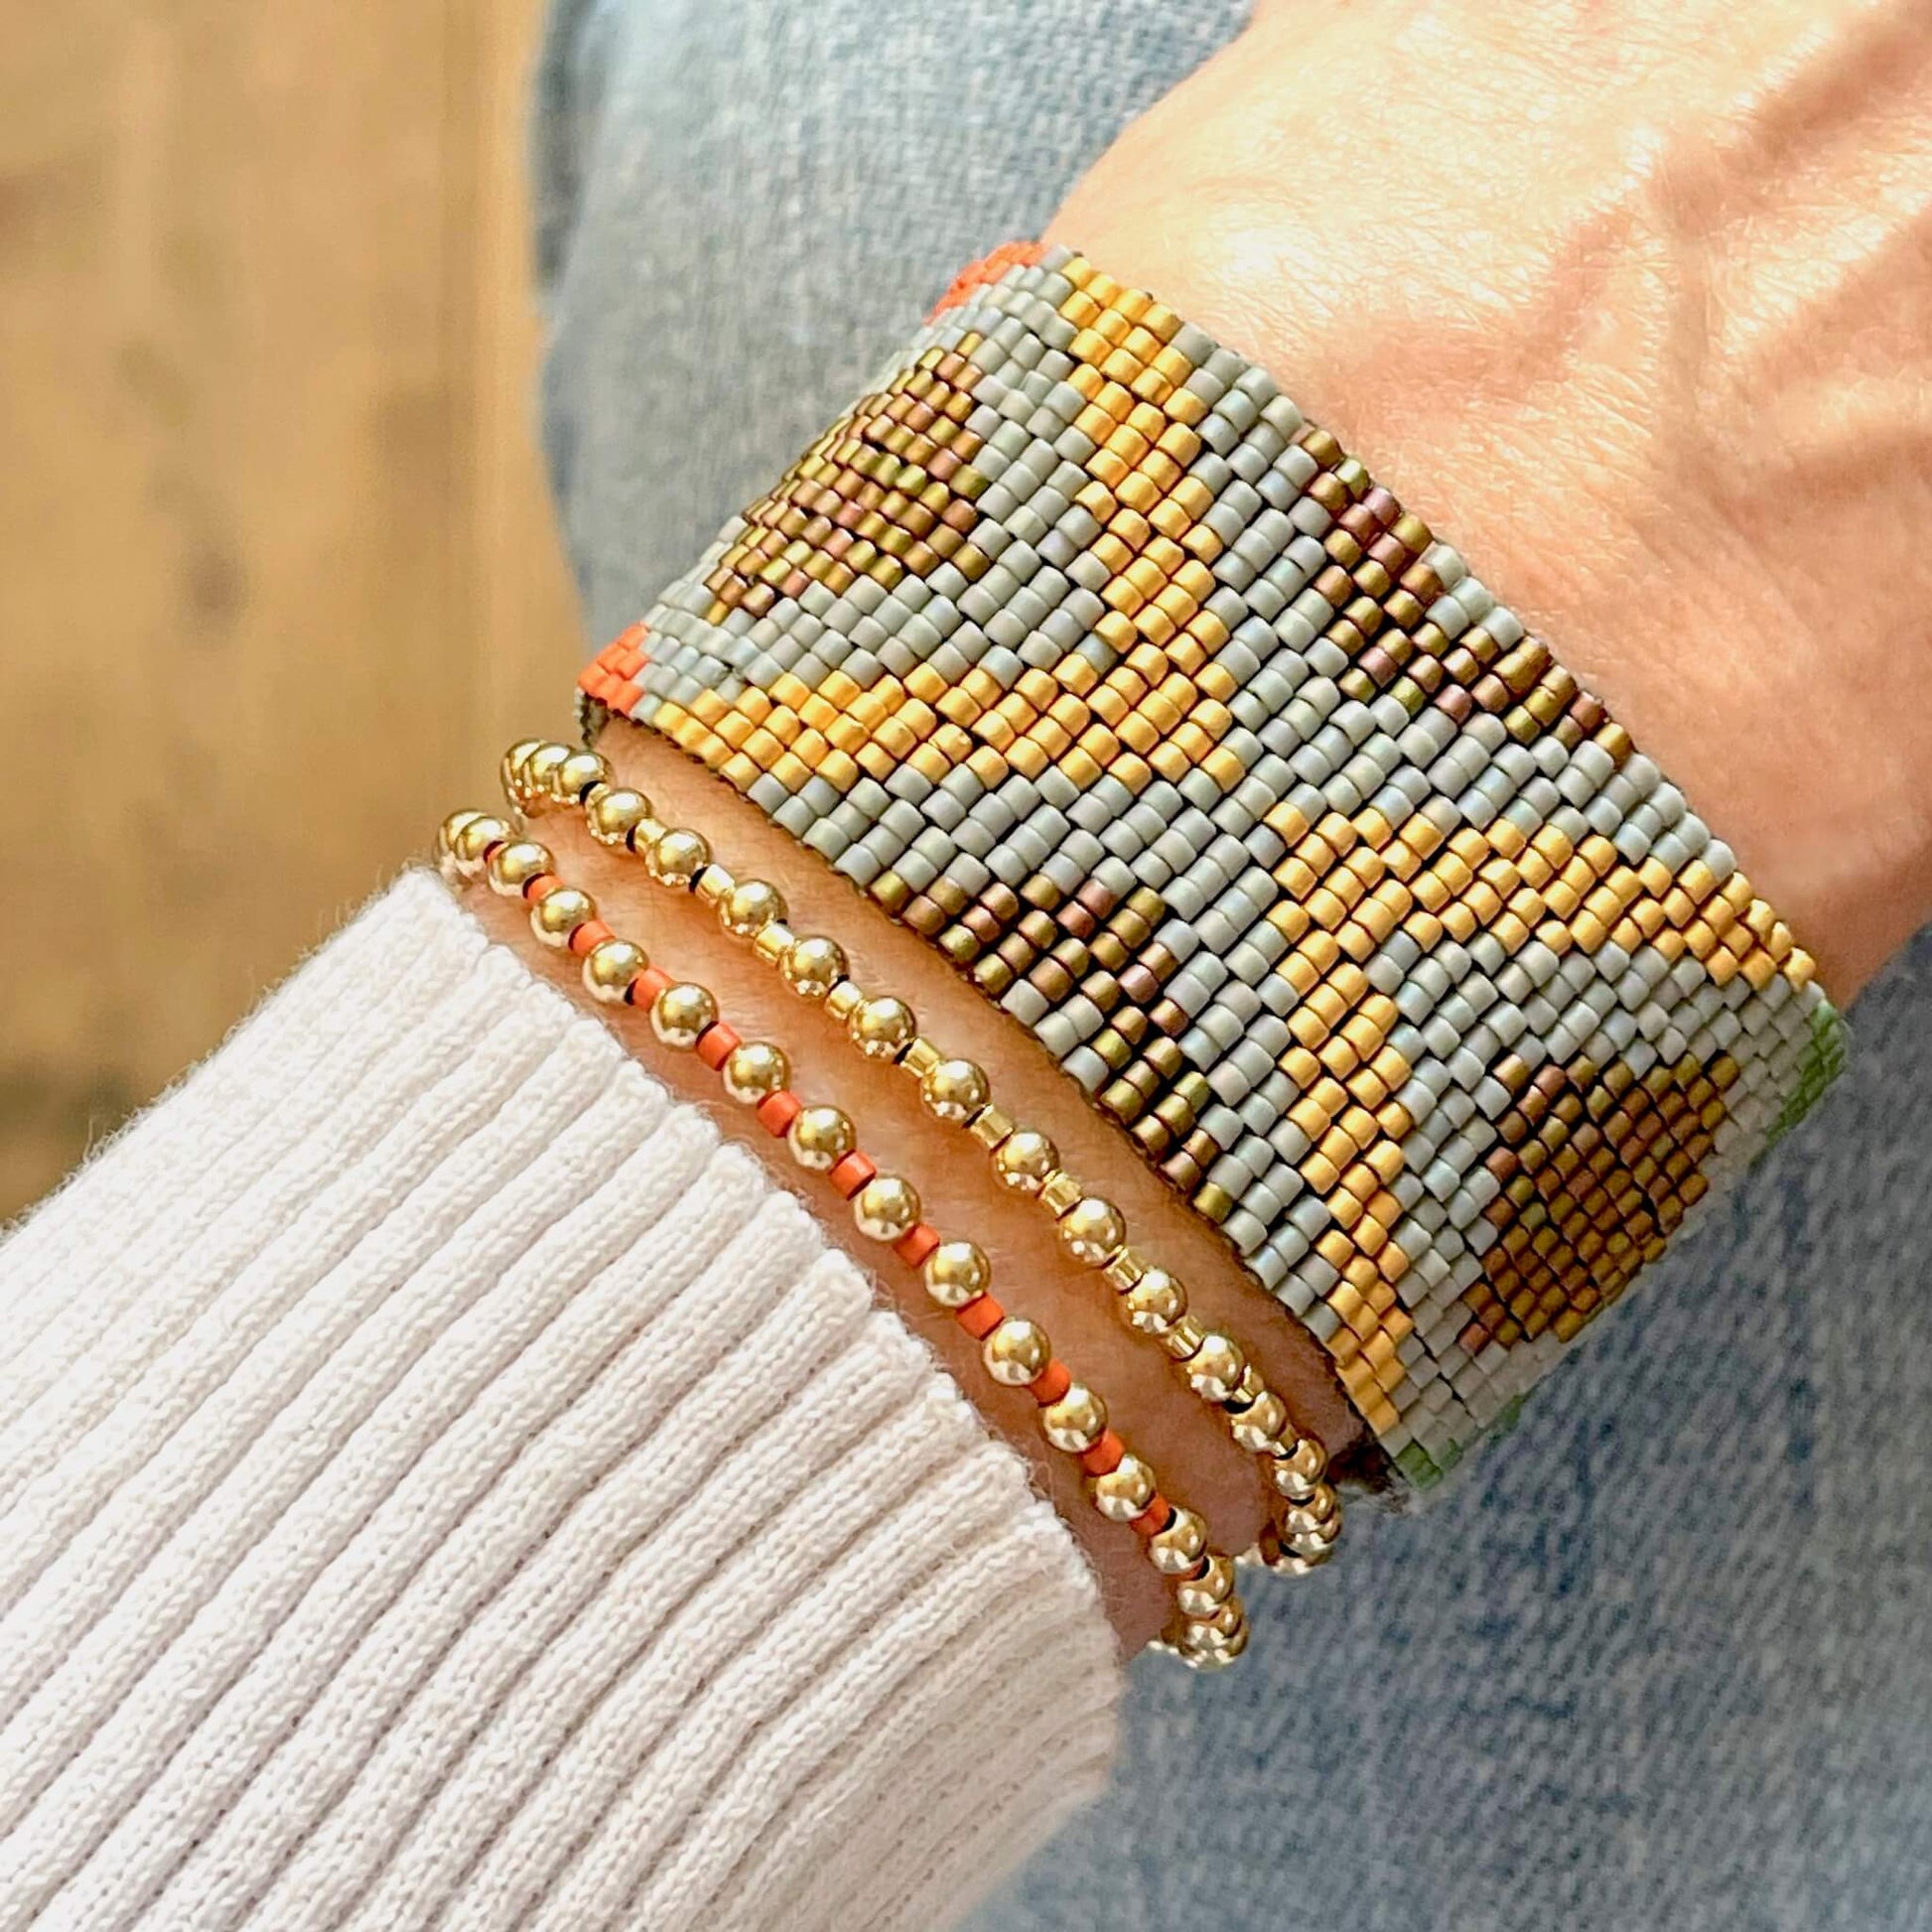 Wide hand woven bracelet with gray, gold, orange, & green miyuki beads, layered with 2 gold fill ball beaded stretch bracelets.